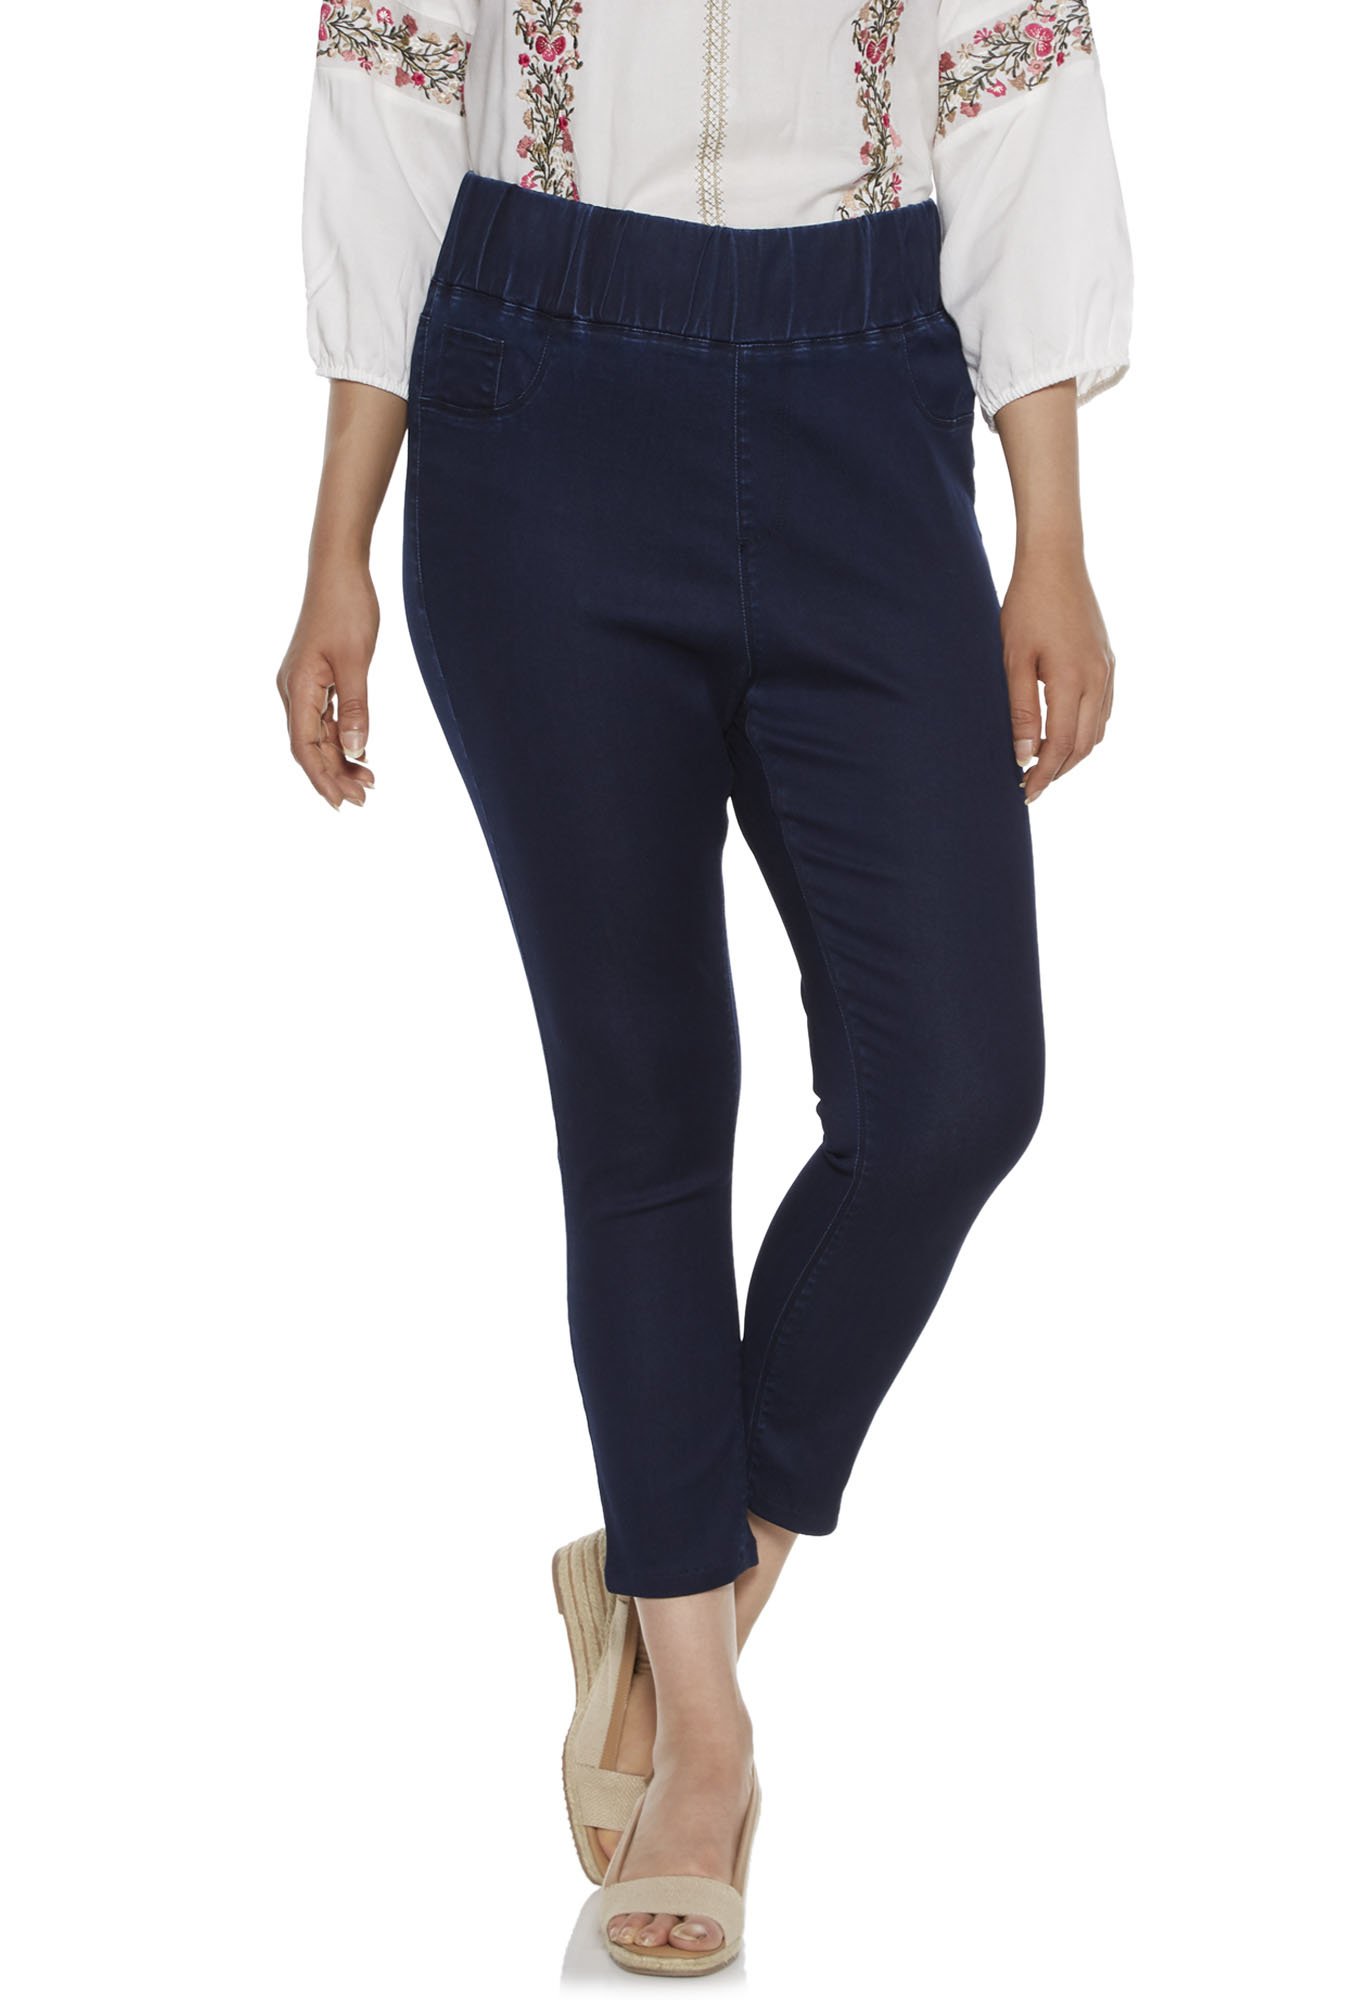 Buy Gia Curves by Westside Black Tapered Pants for Online @ Tata CLiQ